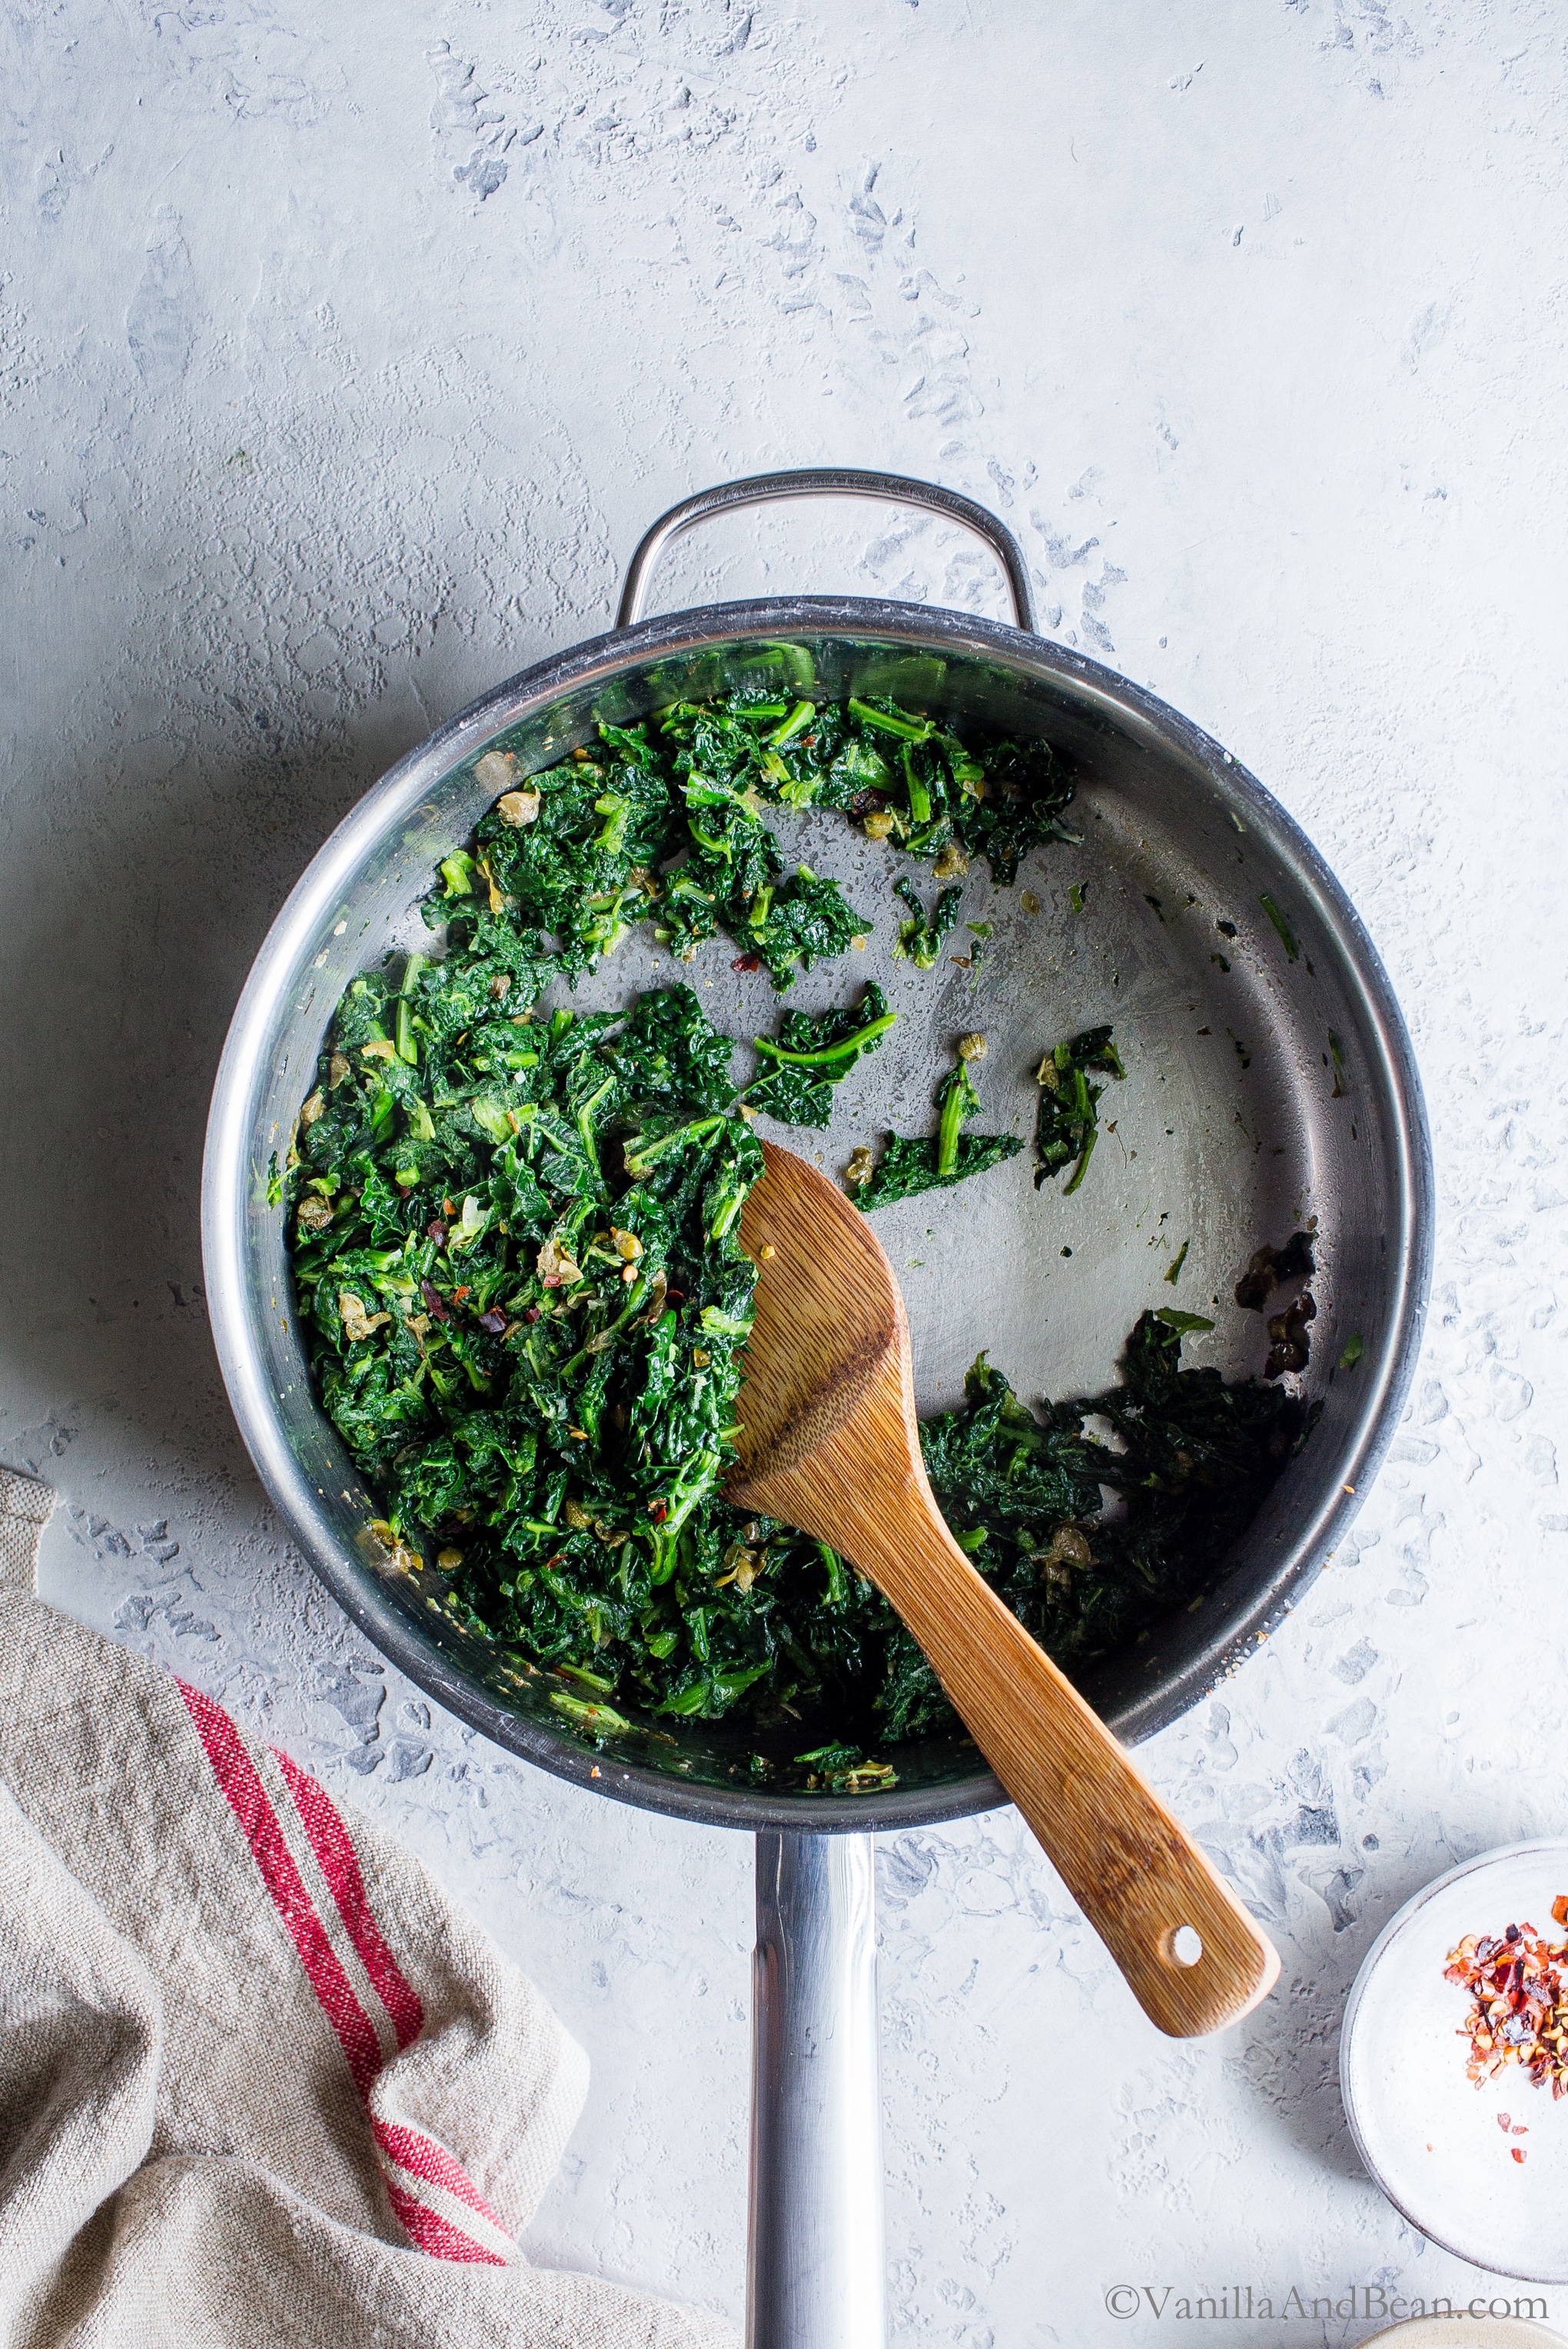 Stirring the blanched kale into the sauce. 